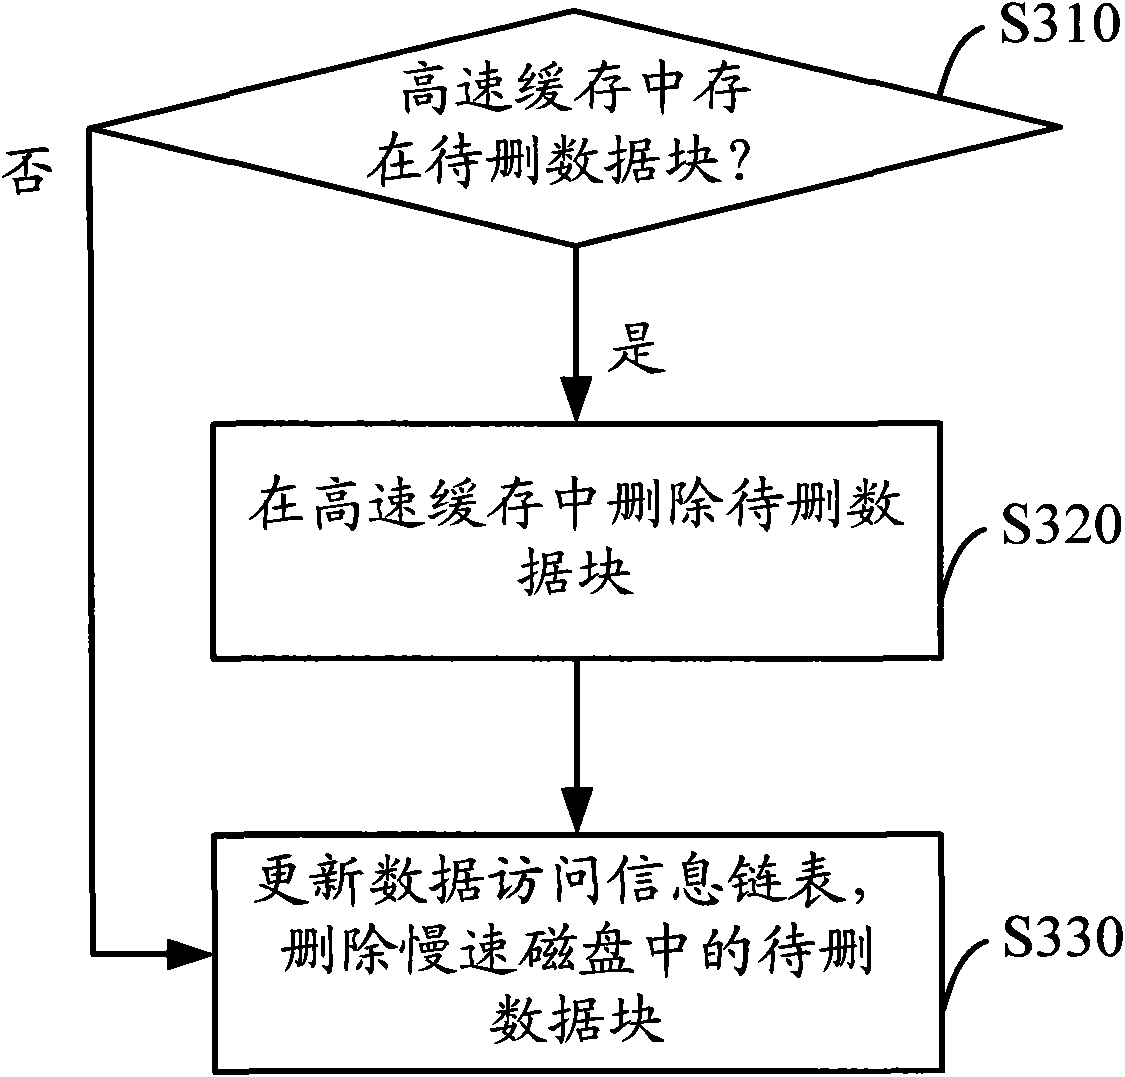 Method and system for dynamically enhancing input/output (I/O) throughput of server